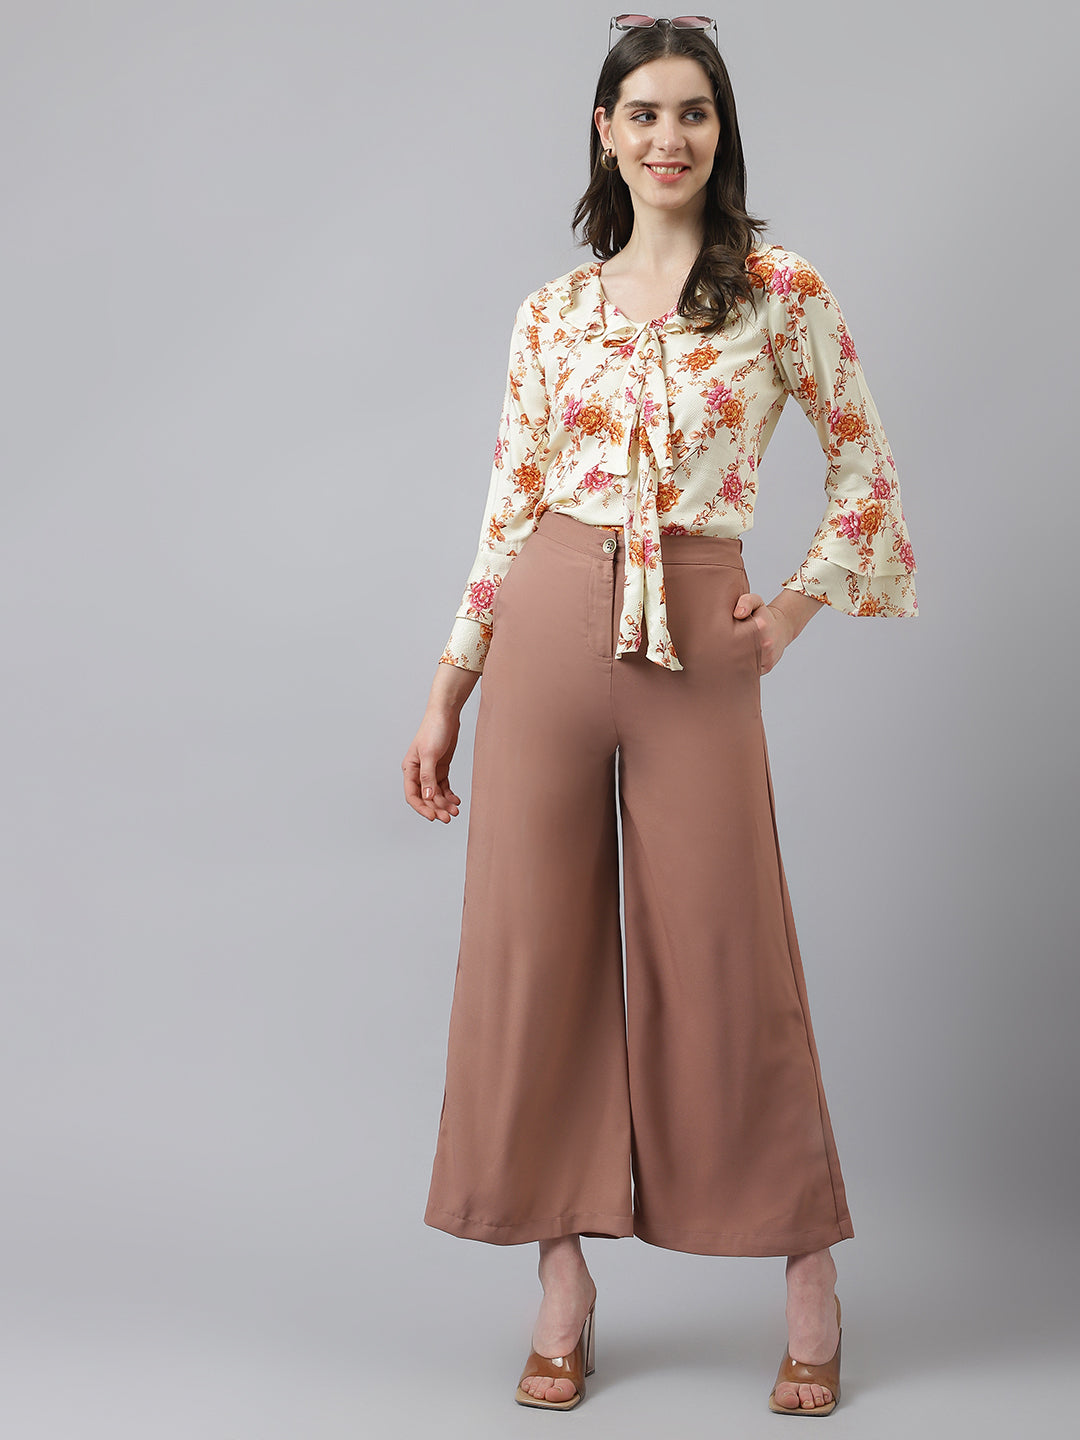 Flower Print Bell Sleeves Top With Front Knot